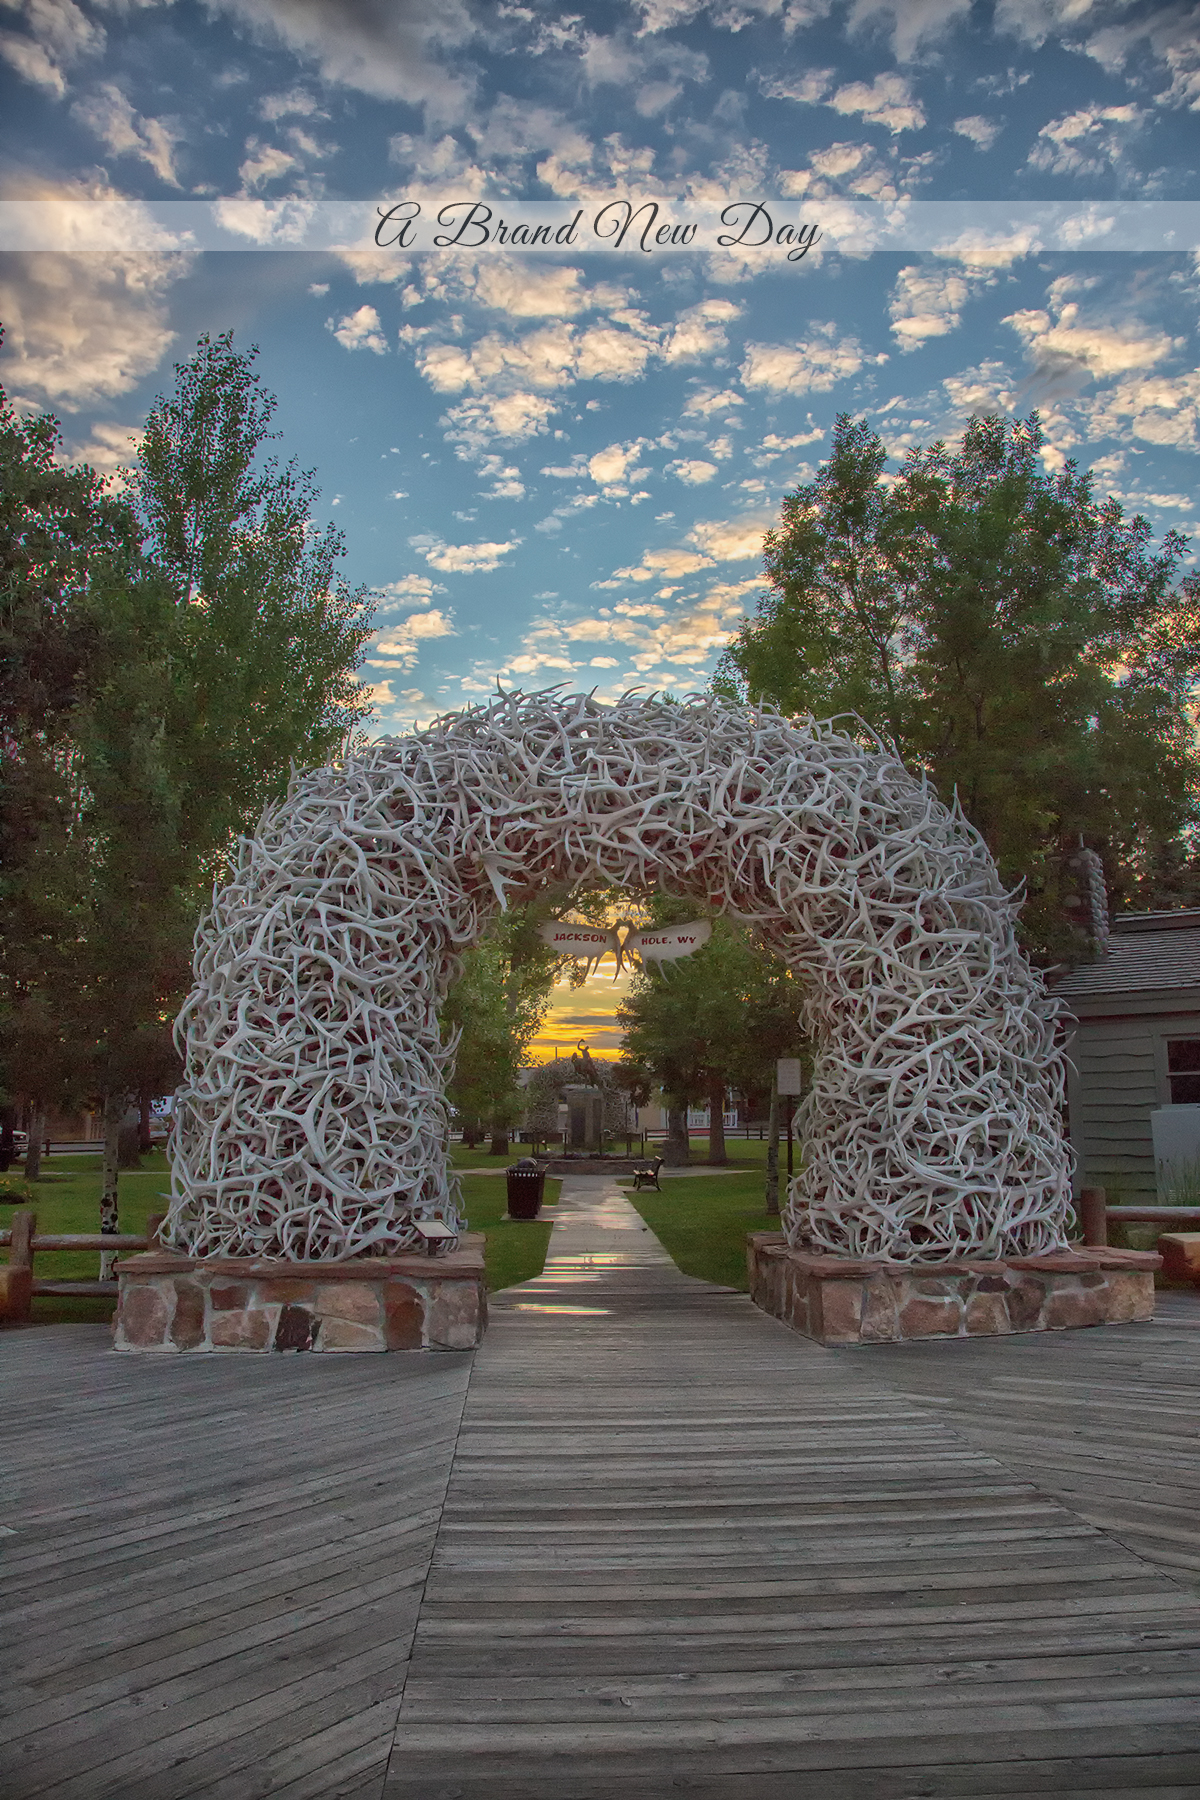 Jackson, WY in the early morning golden hour